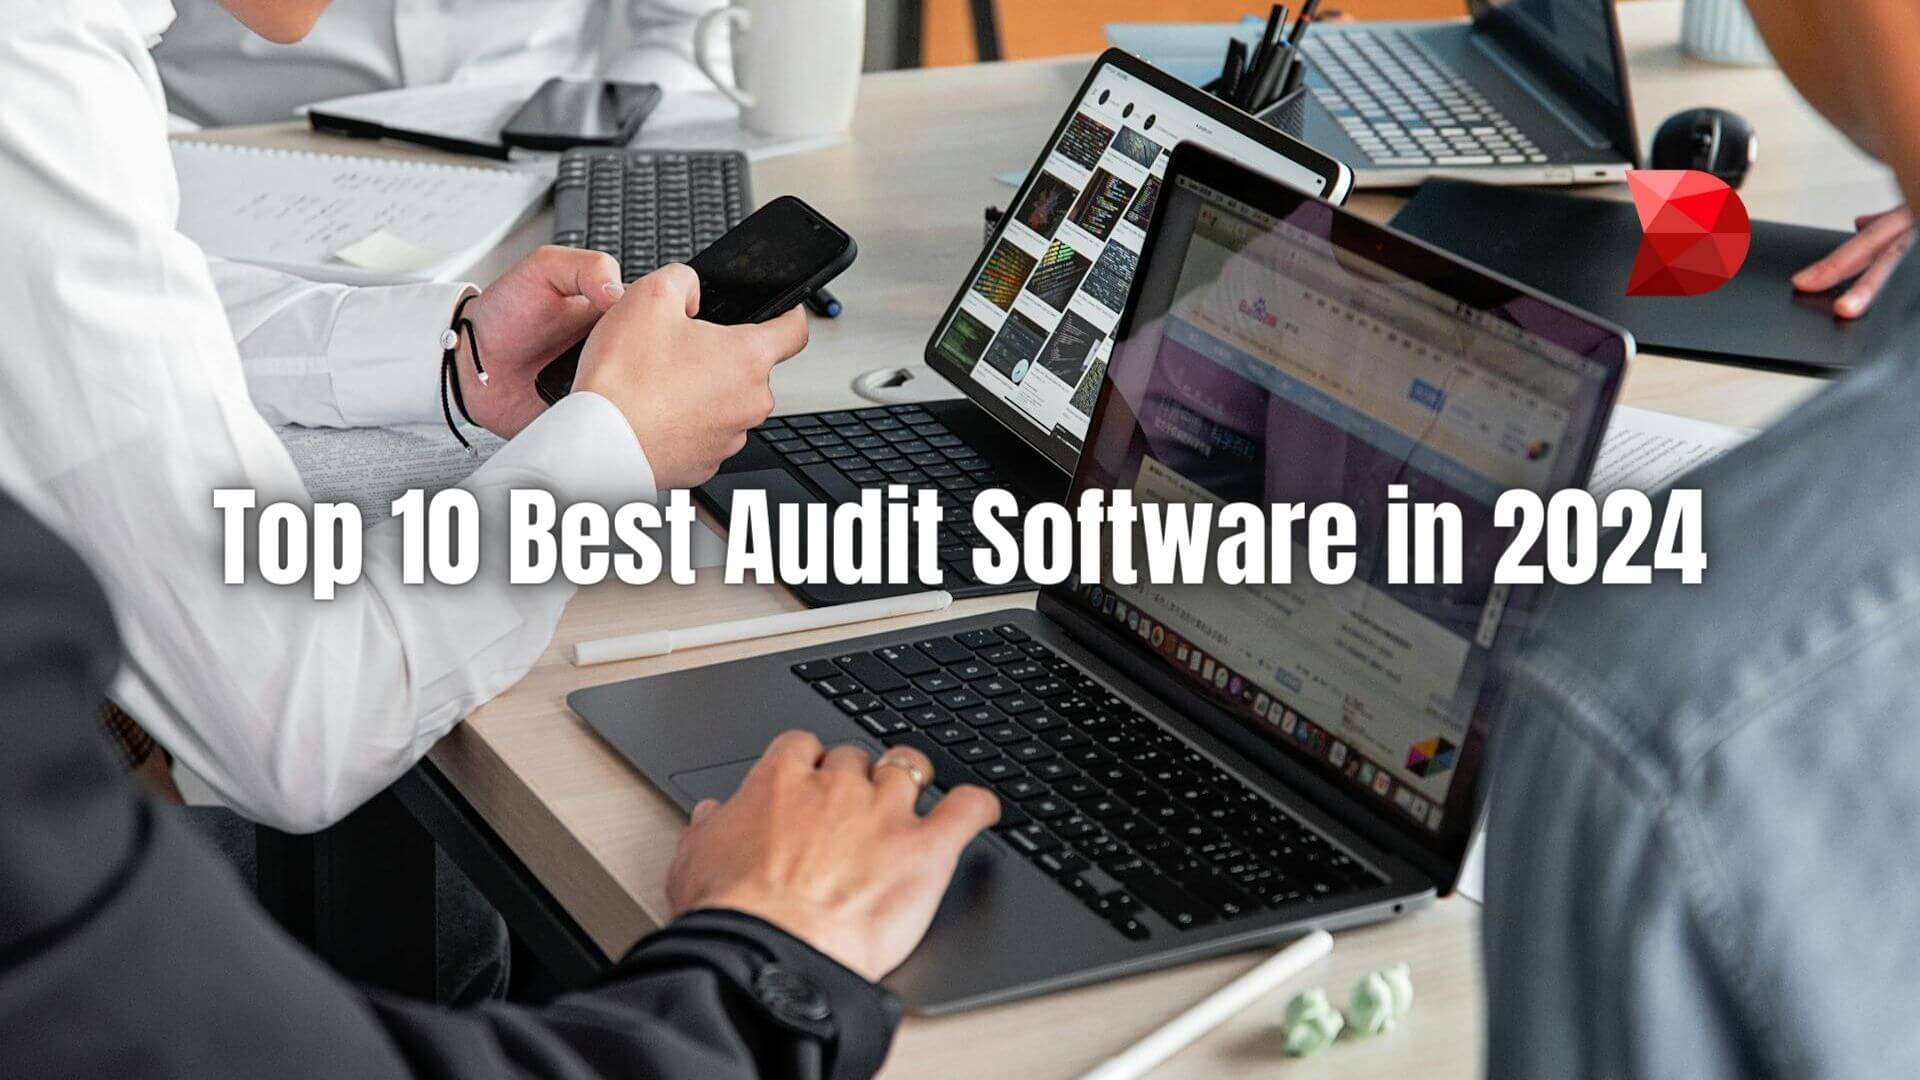 Find the best tools to streamline your auditing processes efficiently. Click here to discover the ultimate audit software solutions in 2024.